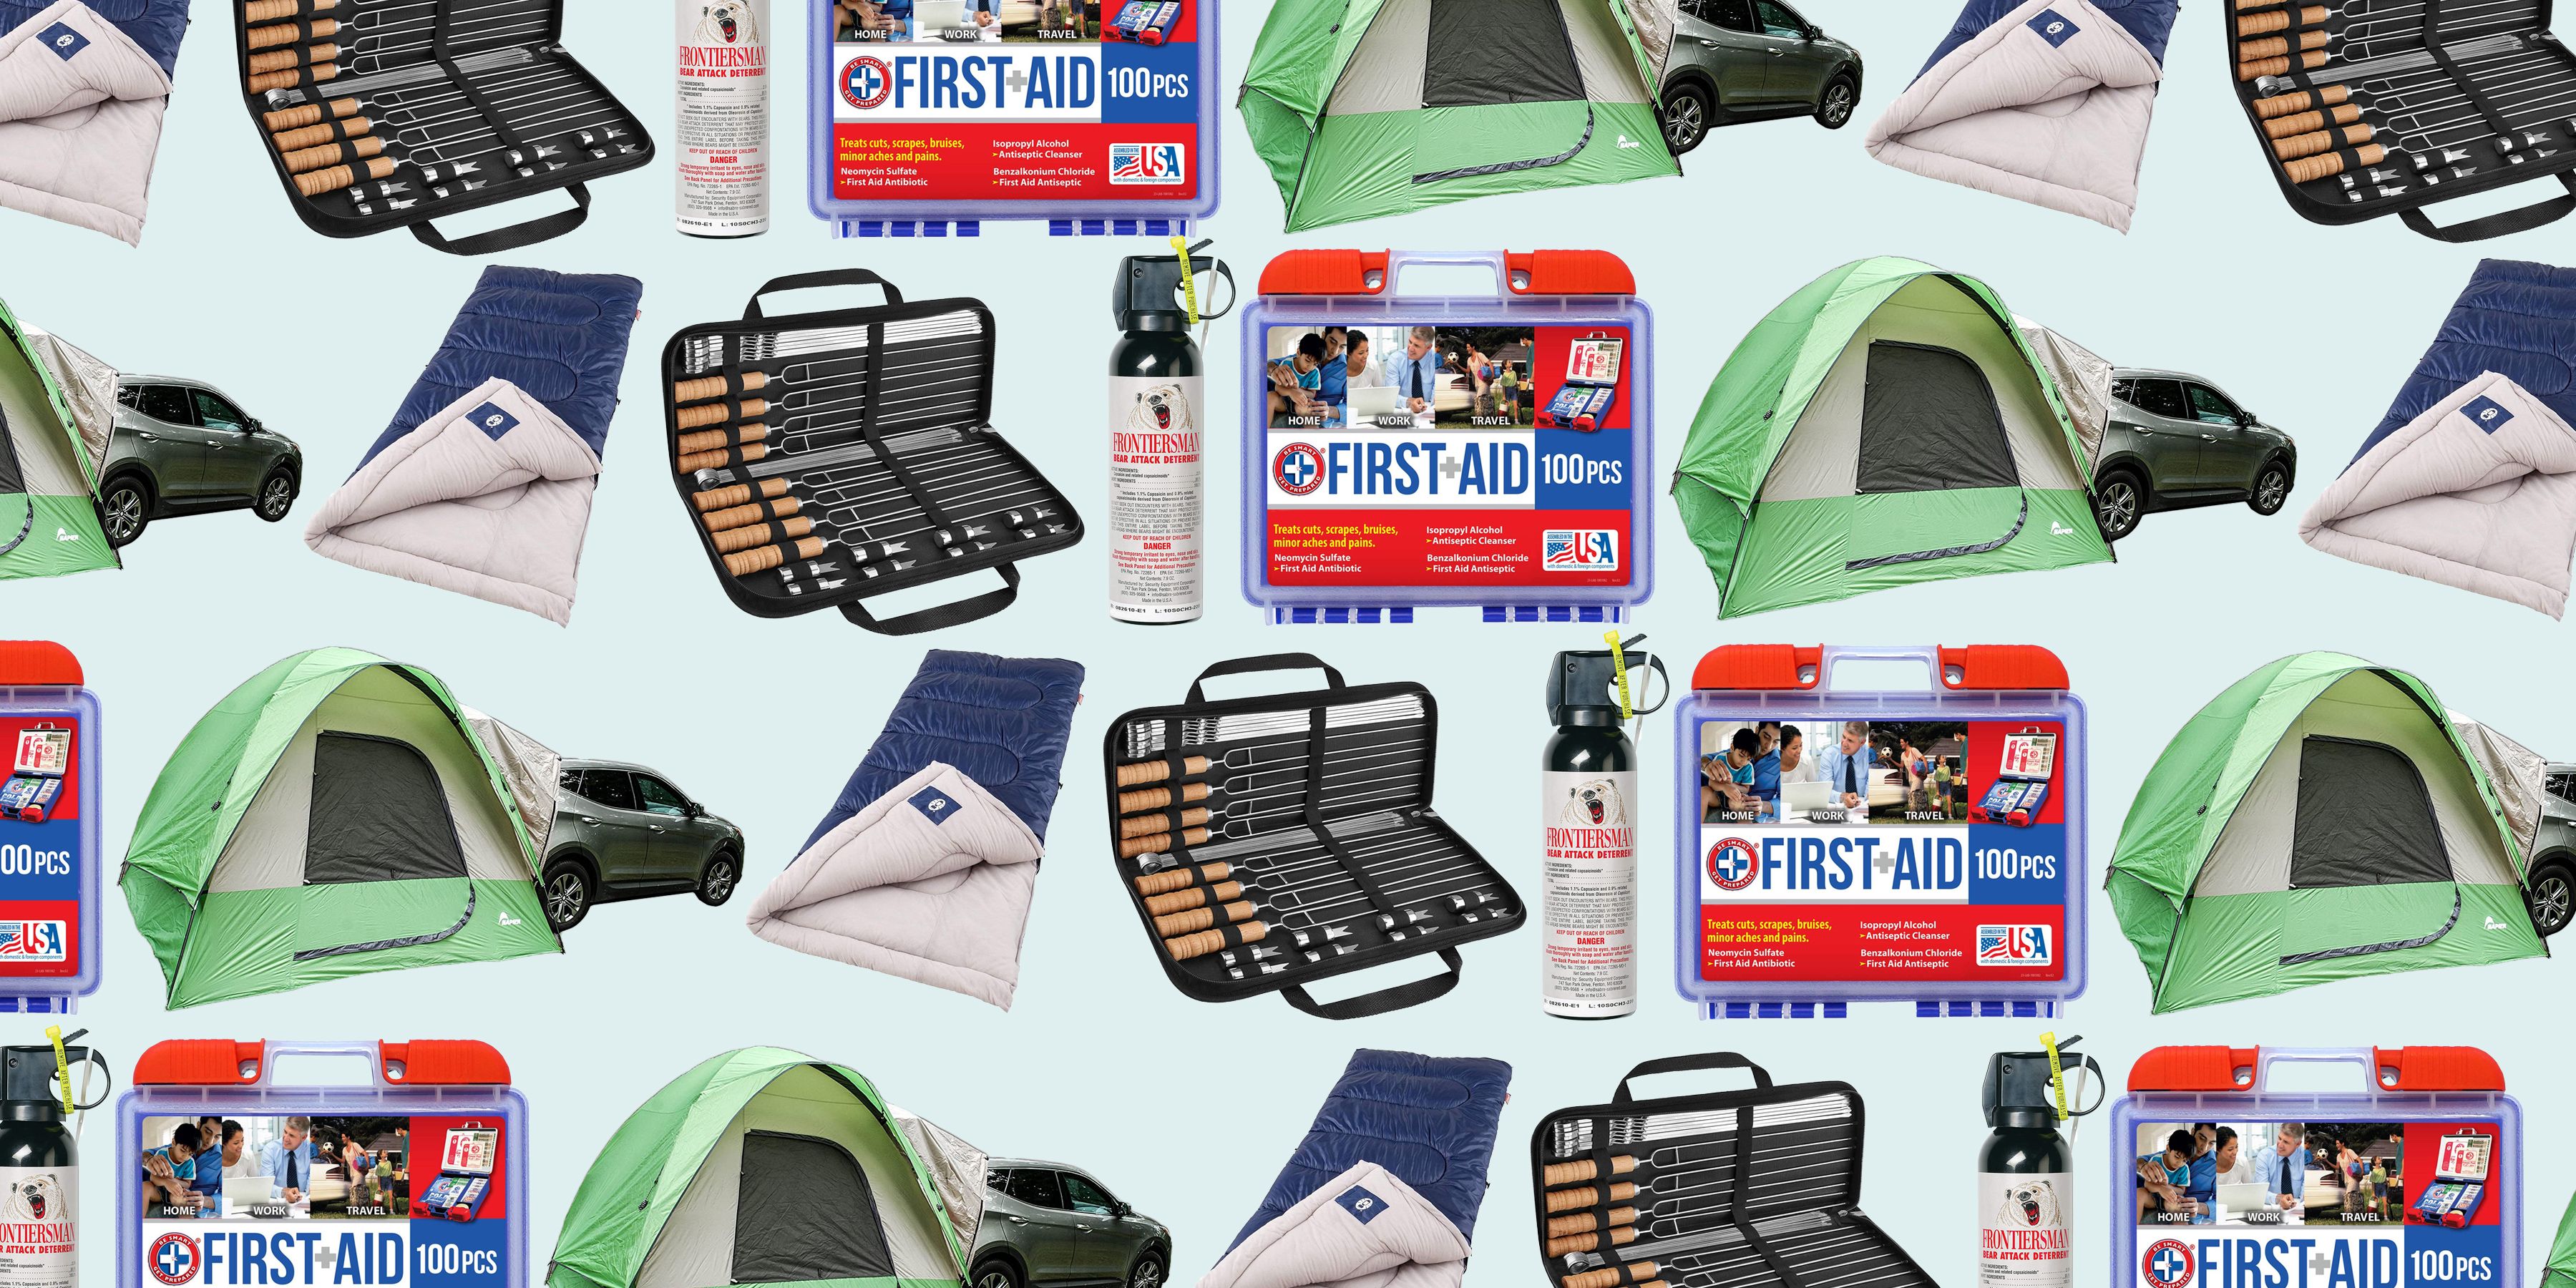 11 Car Camping Gadgets & Accesories 